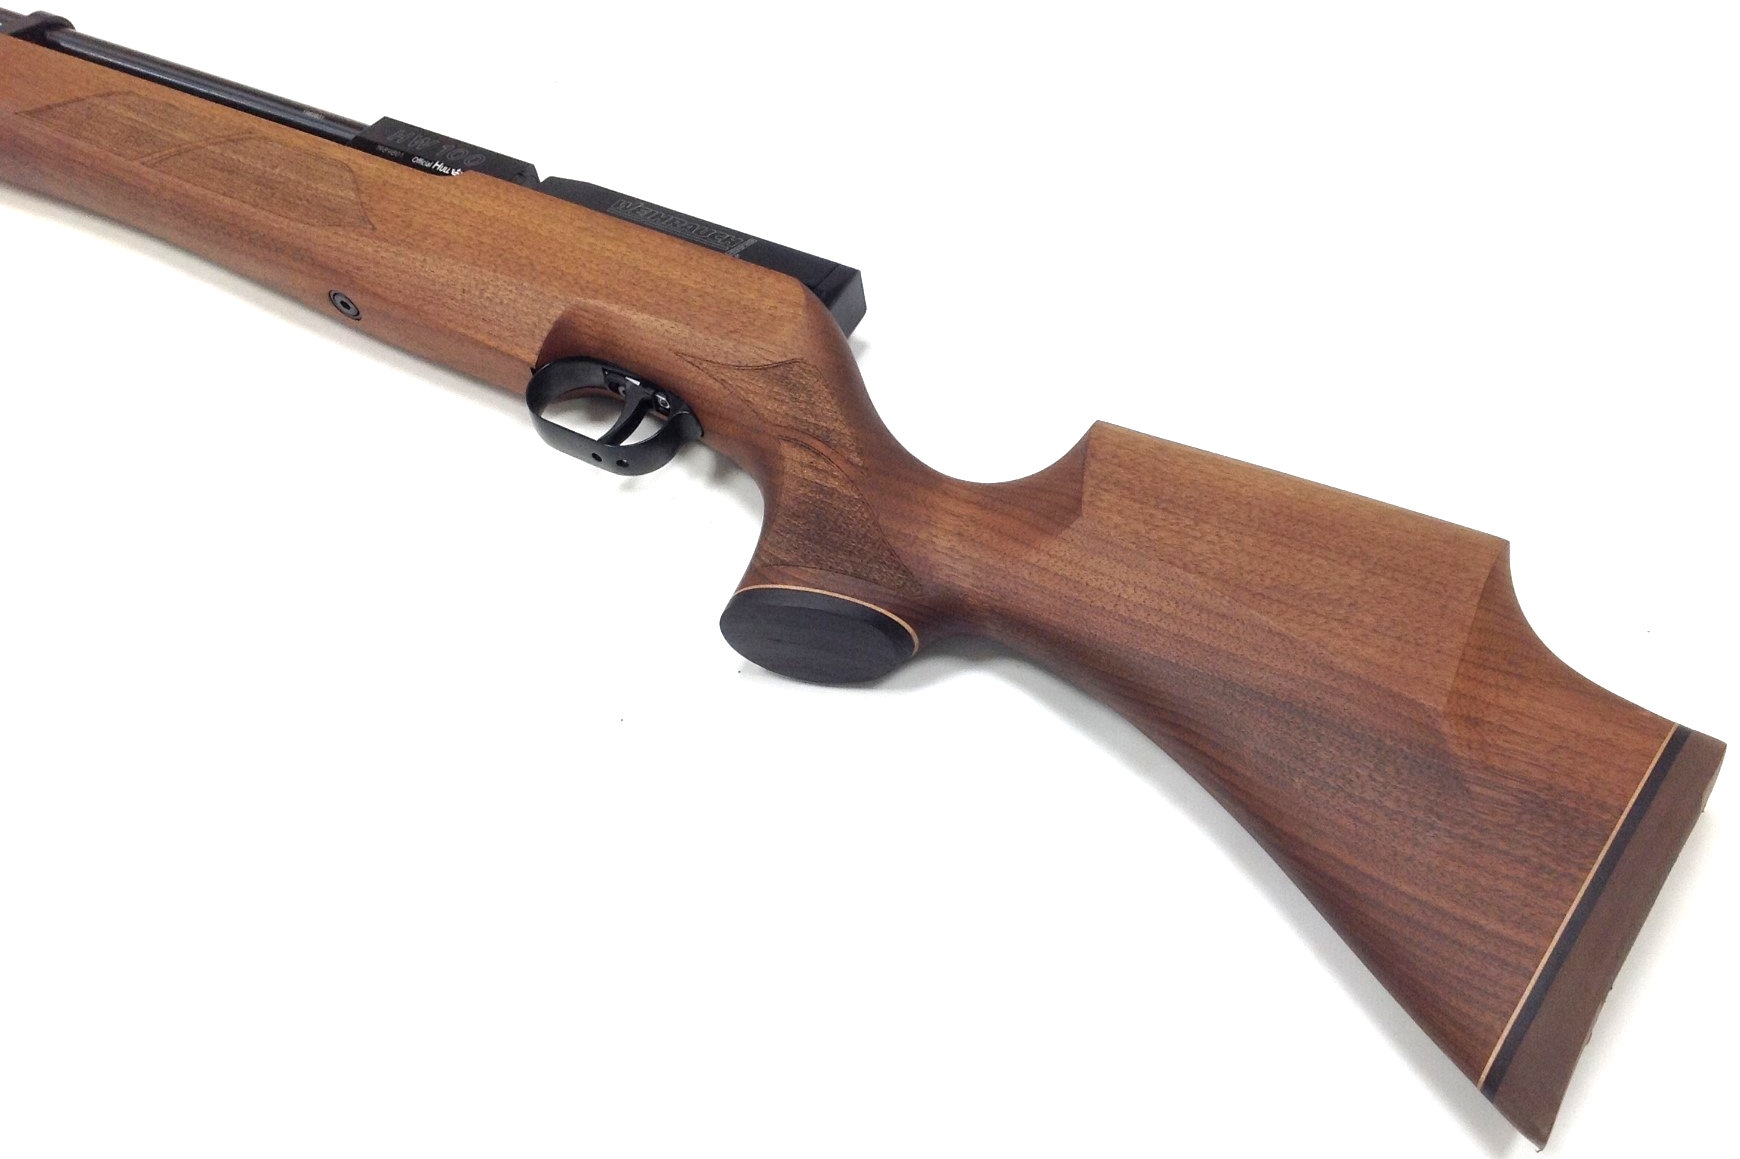 Weihrauch HW100 S .177 Pre-Charged Air Rifle - 230913/015 Image 4